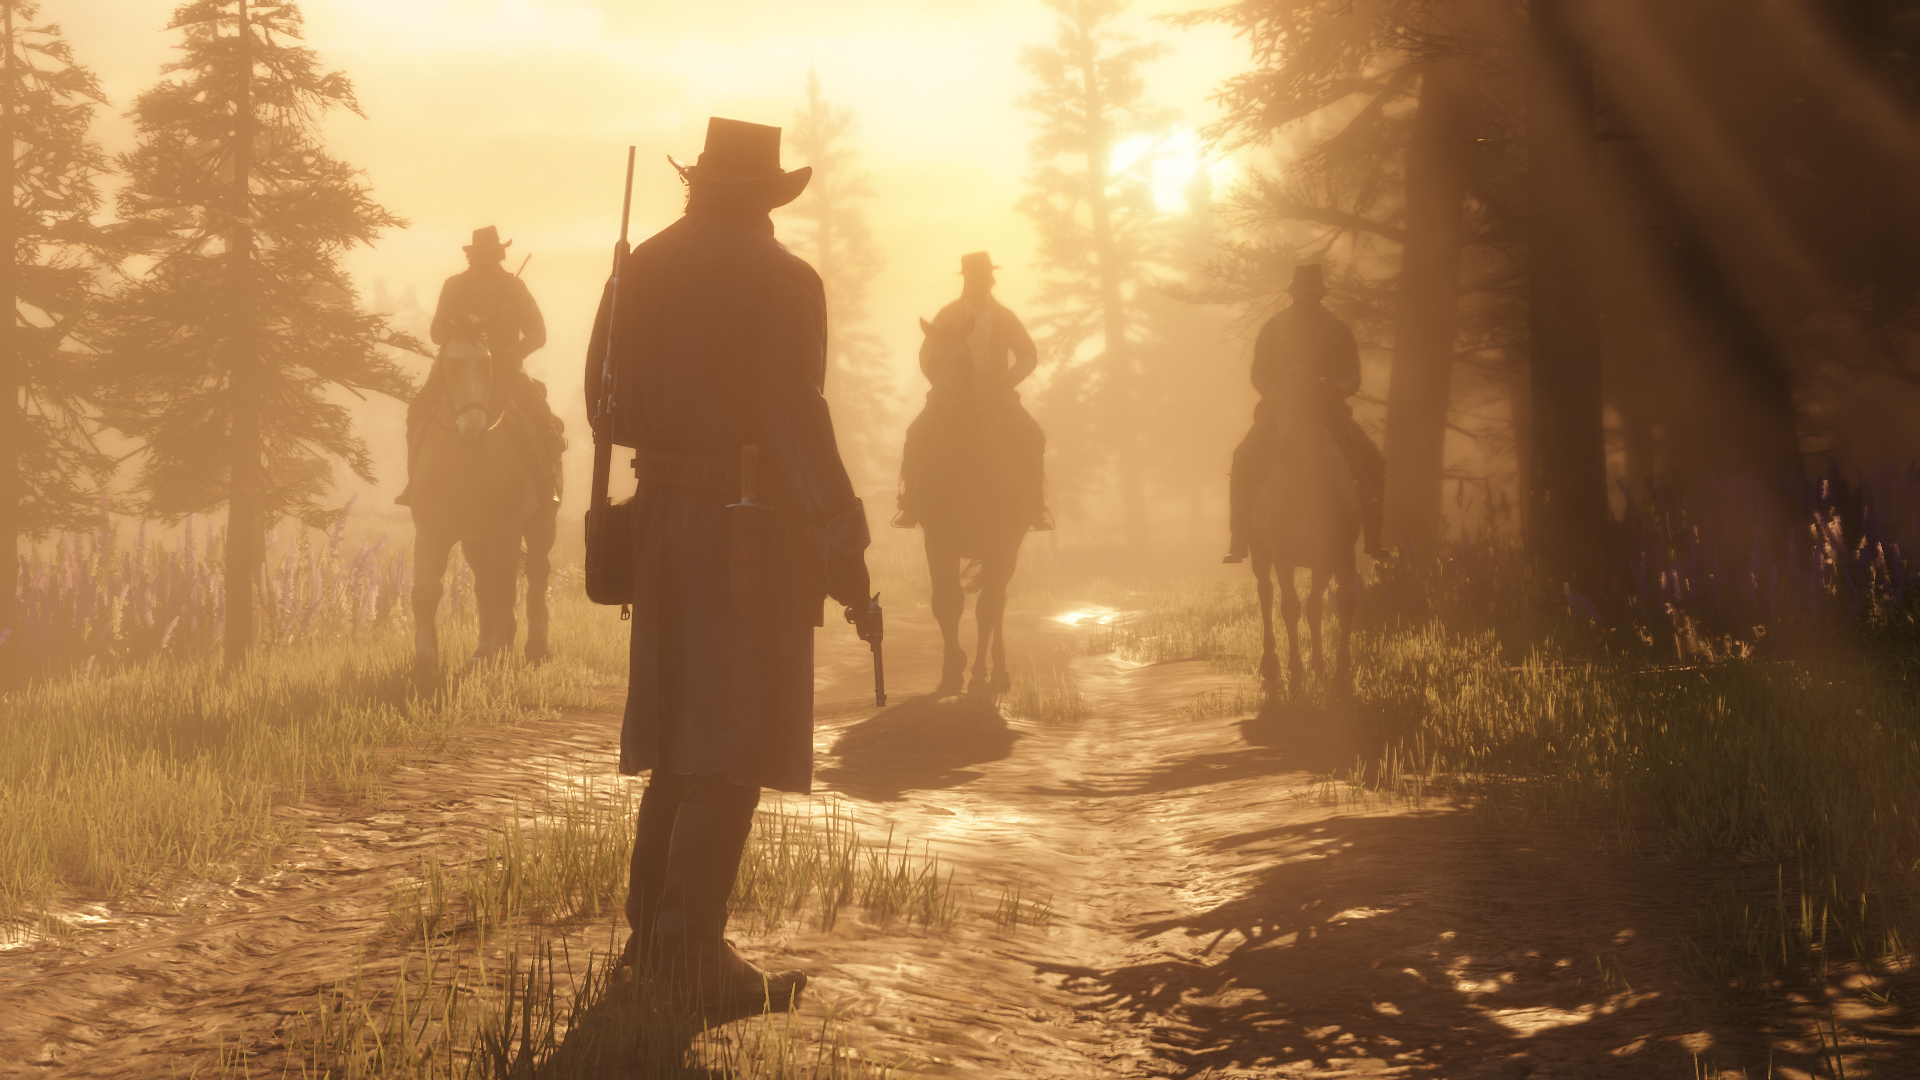 Red Dead Redemption PC Announcement Is Up to the Developers